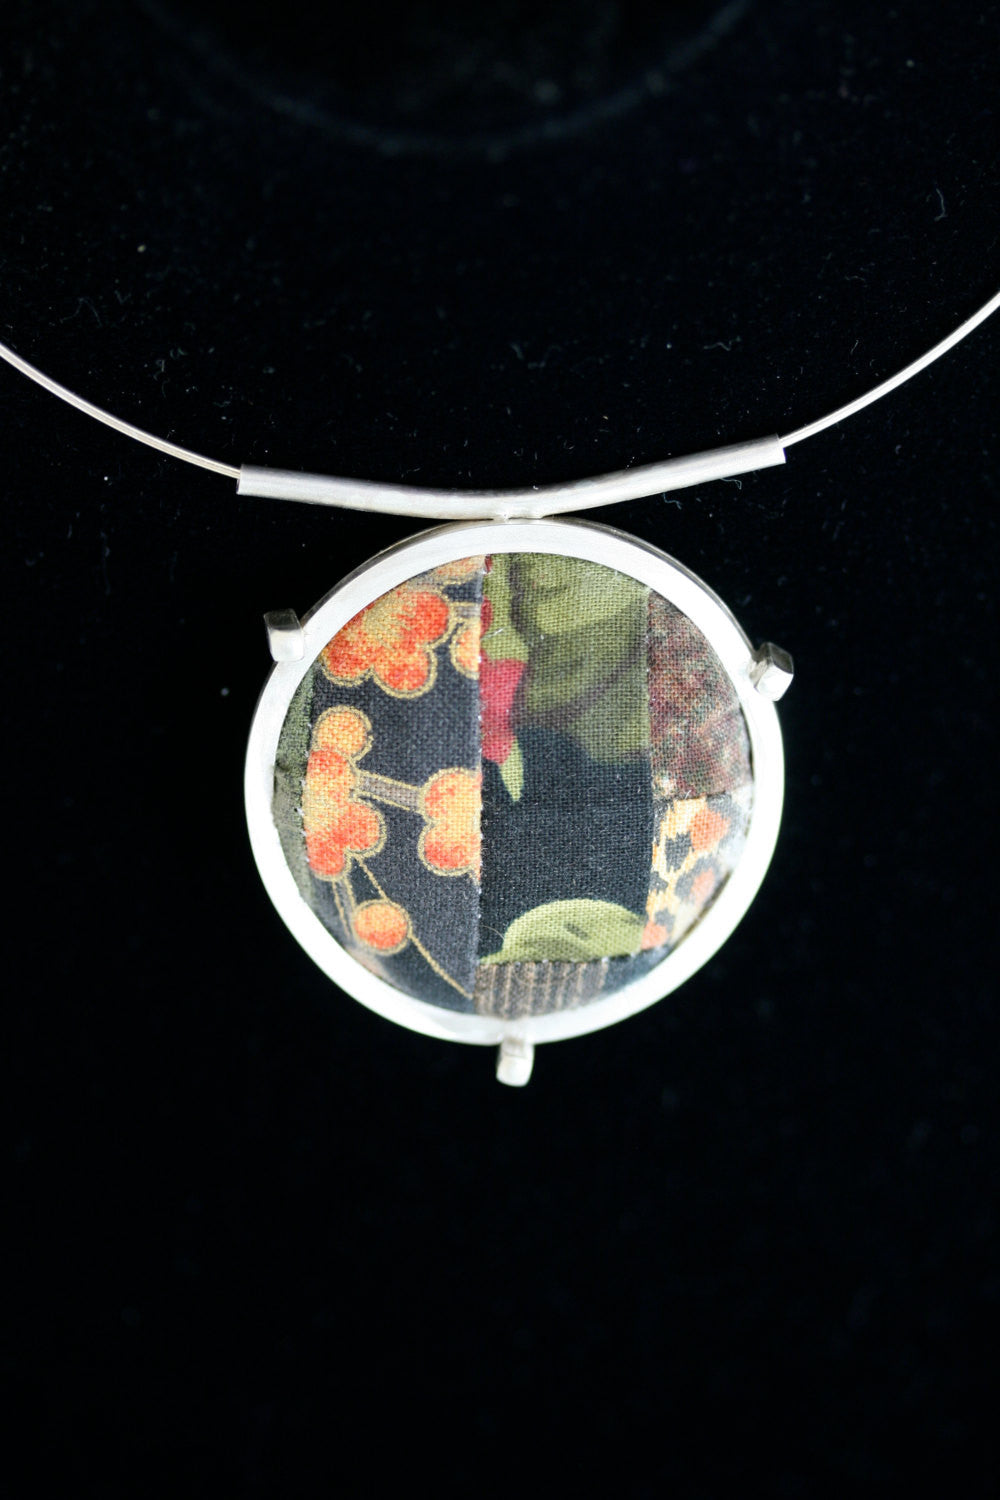 One of a Kind Pattern Handmade Quilt Square Sterling Silver Pendant on Neckring